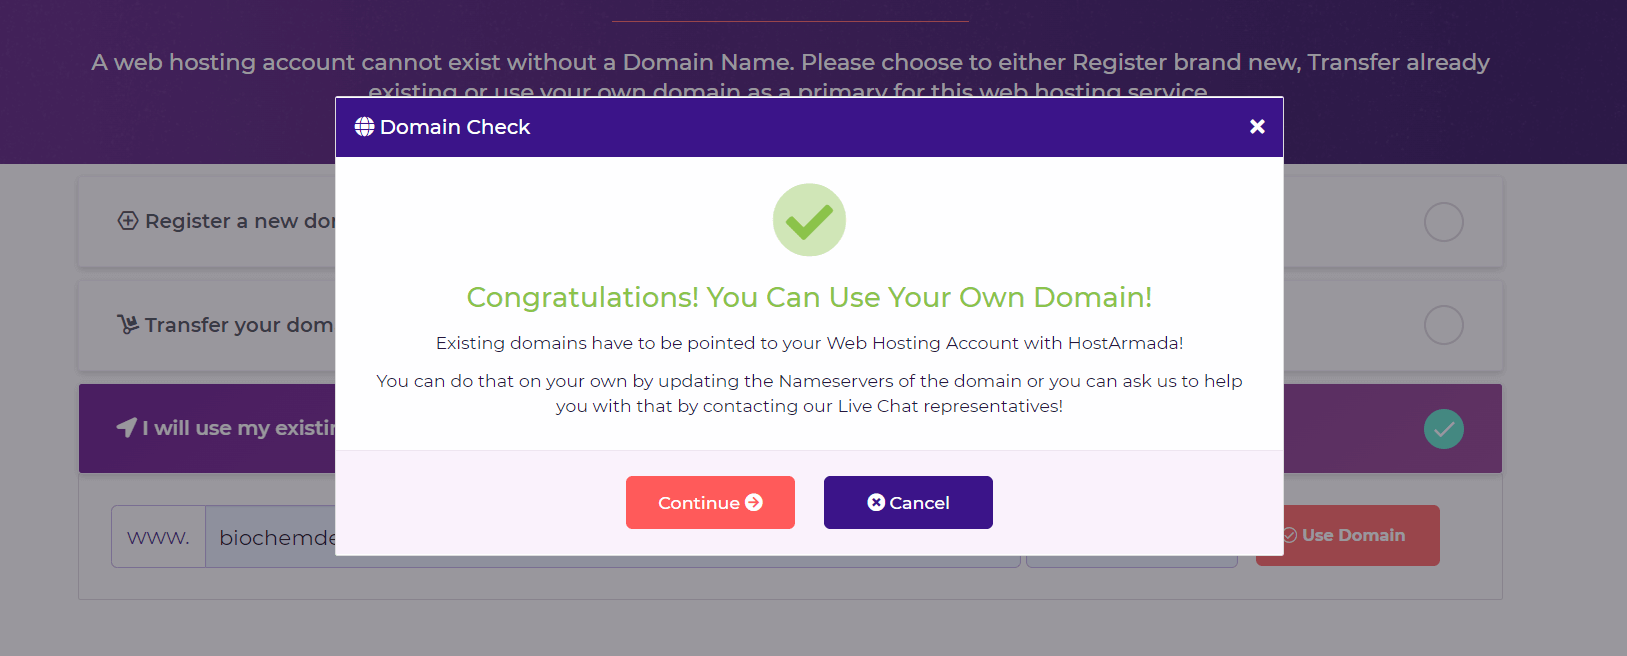 CONGRATULATIONS TO use existing domain